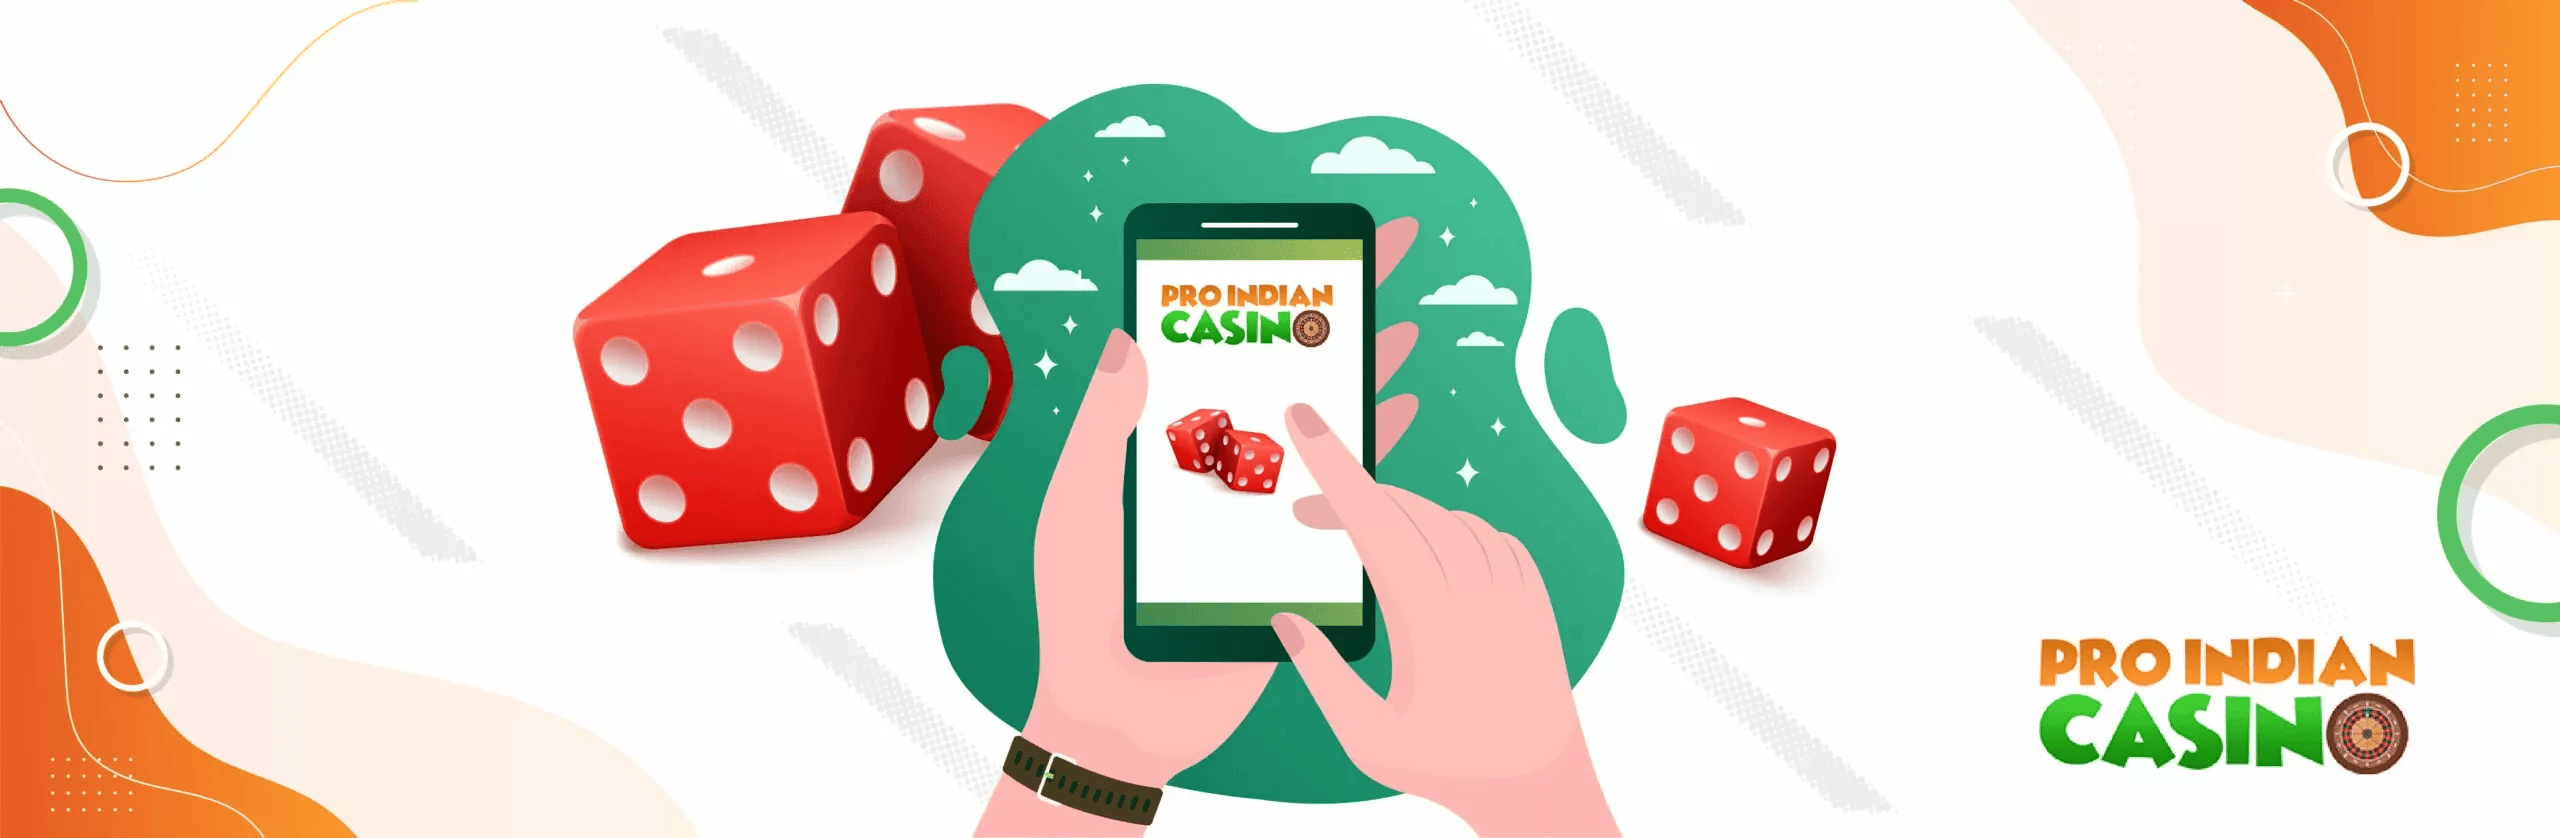 What-are-the-Good-reasons-to-play-at-Online-Casinos-in-India-scaled-1-min